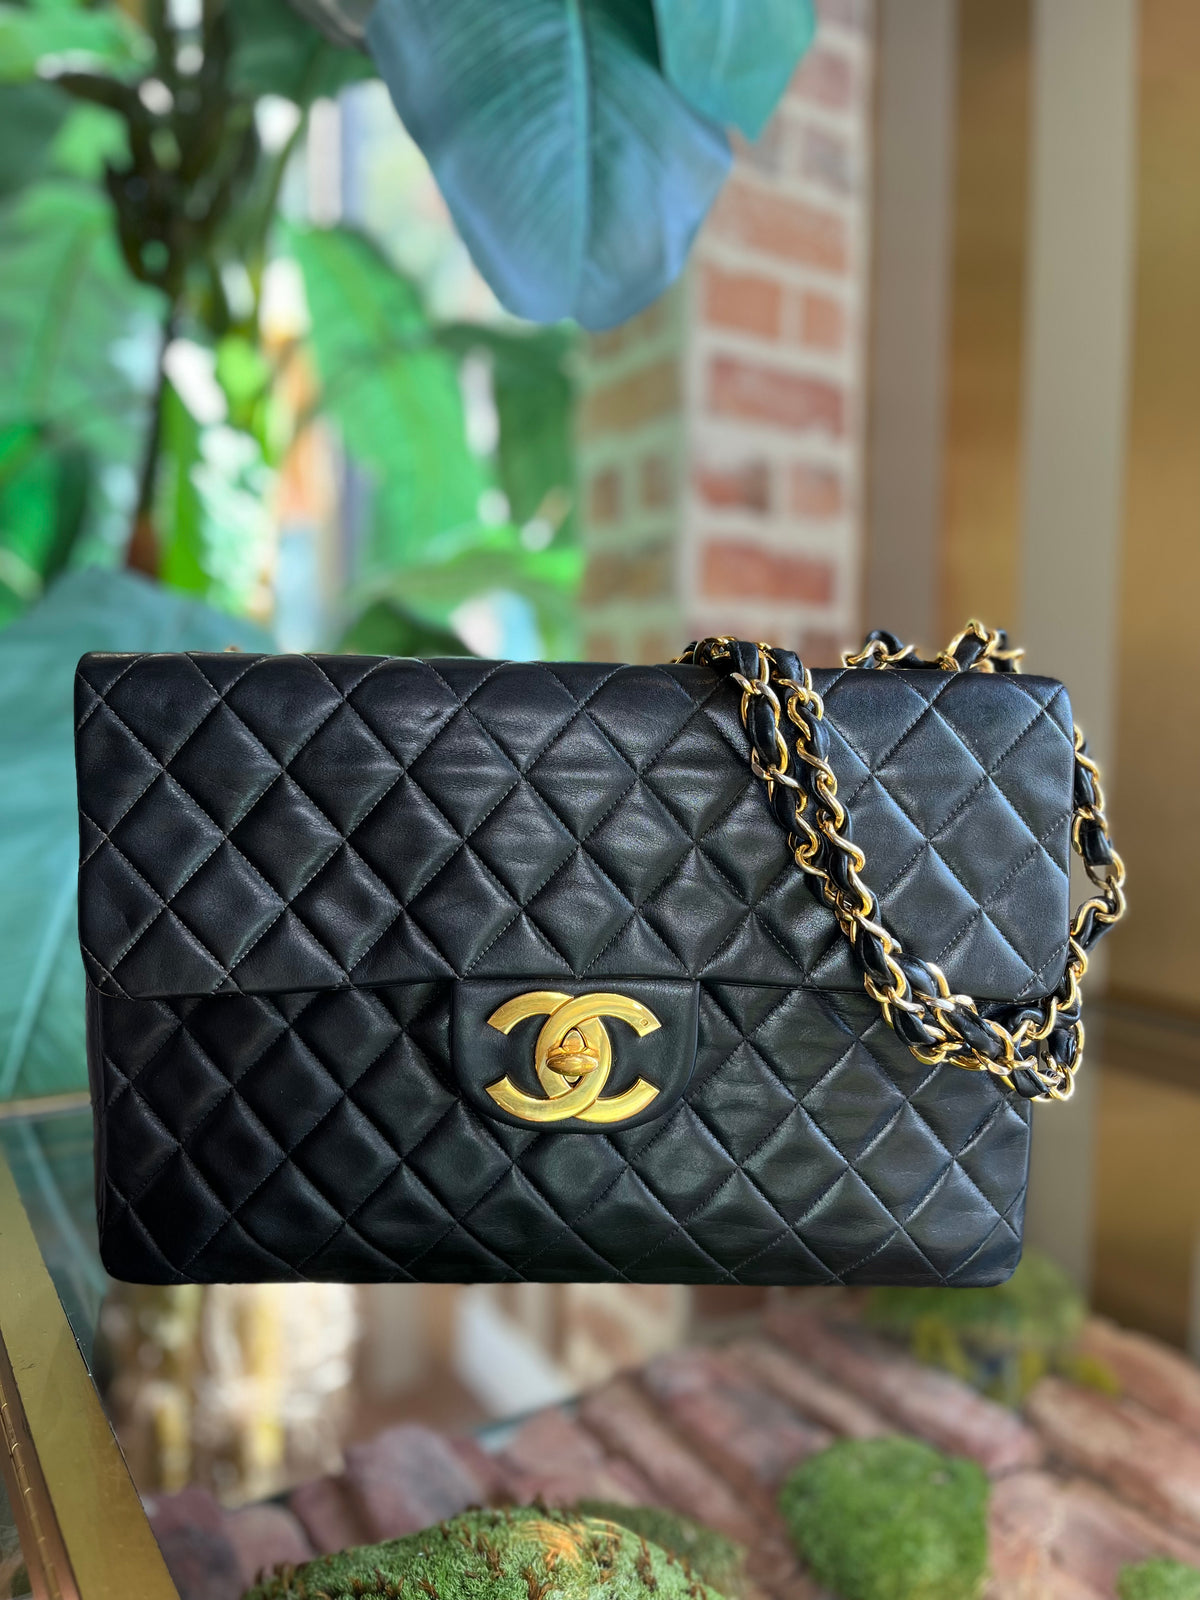 CHANEL Black Quilted Lambskin Leather Classic Maxi Jumbo XL Flap Bag